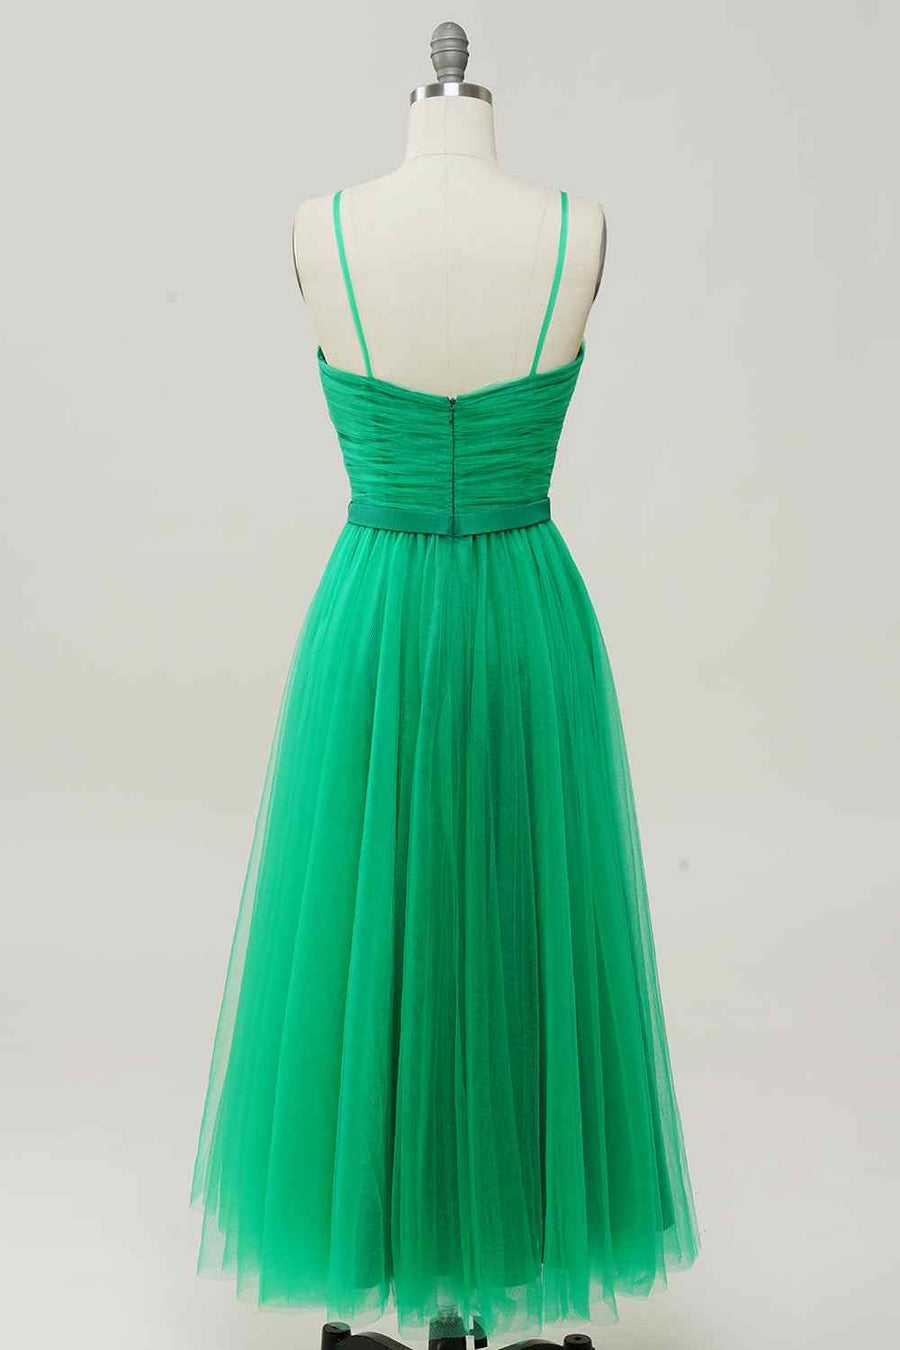 Green A-line Sweetheart Neck Tulle Pleated Knee Length Prom Dress